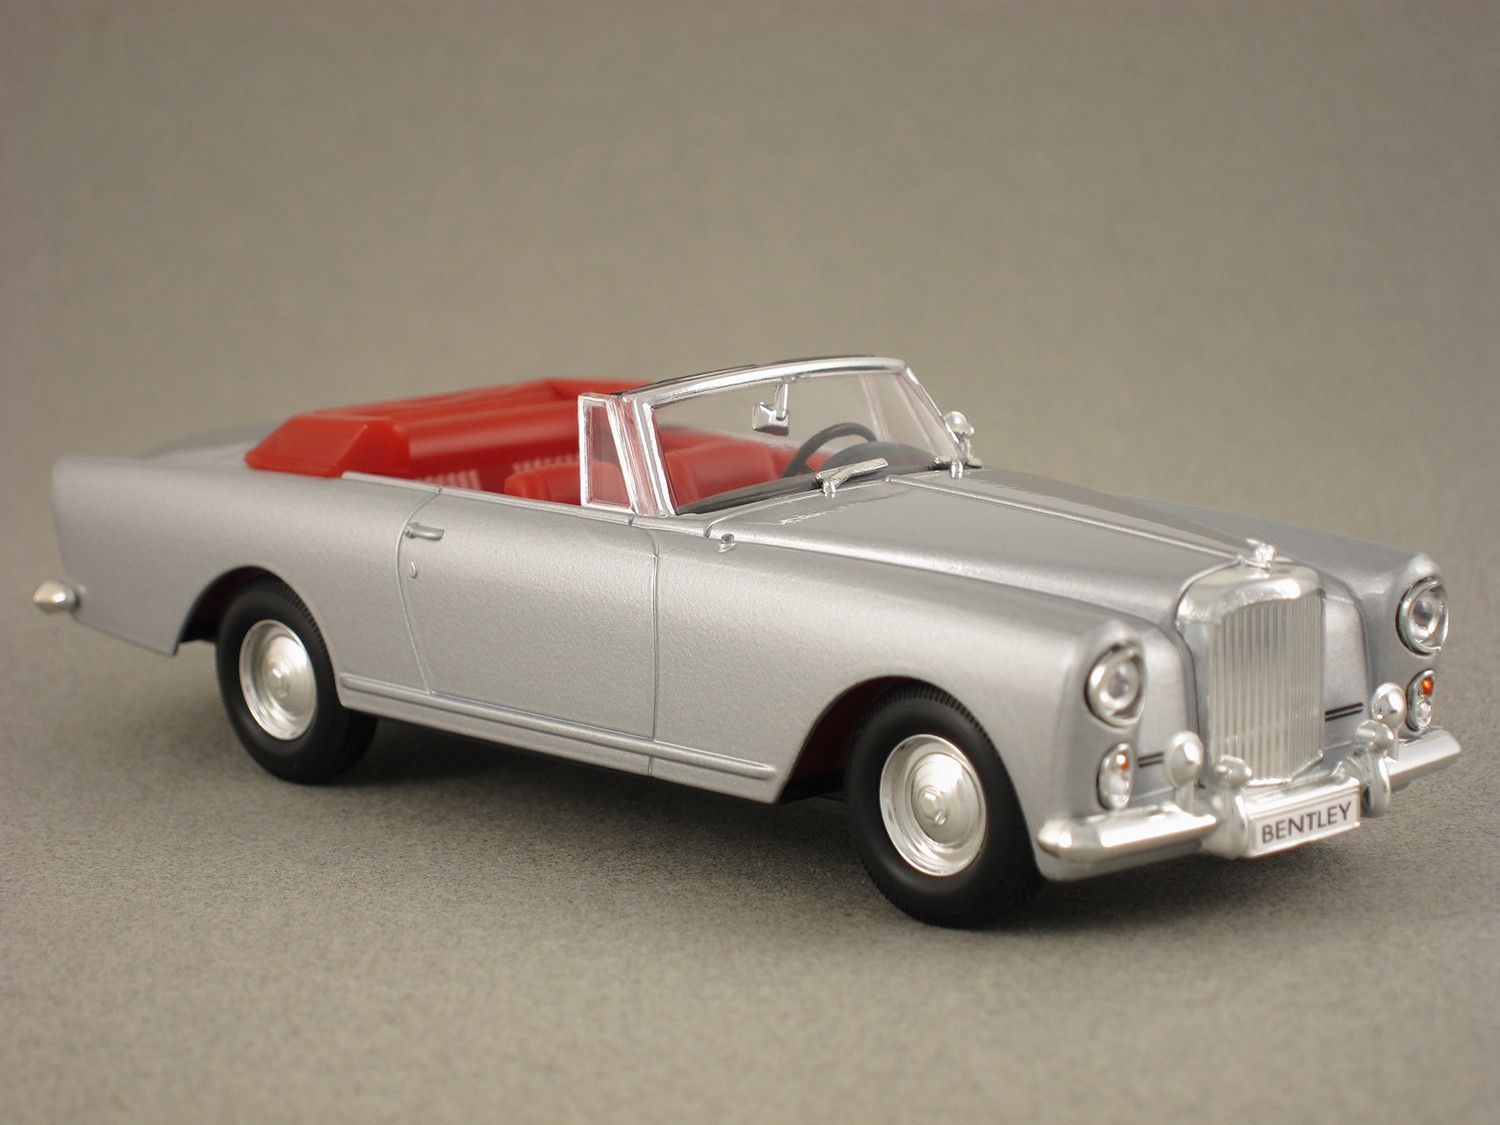 Bentley Continental S2 Drophead Coupe (Yat Ming) 1:43